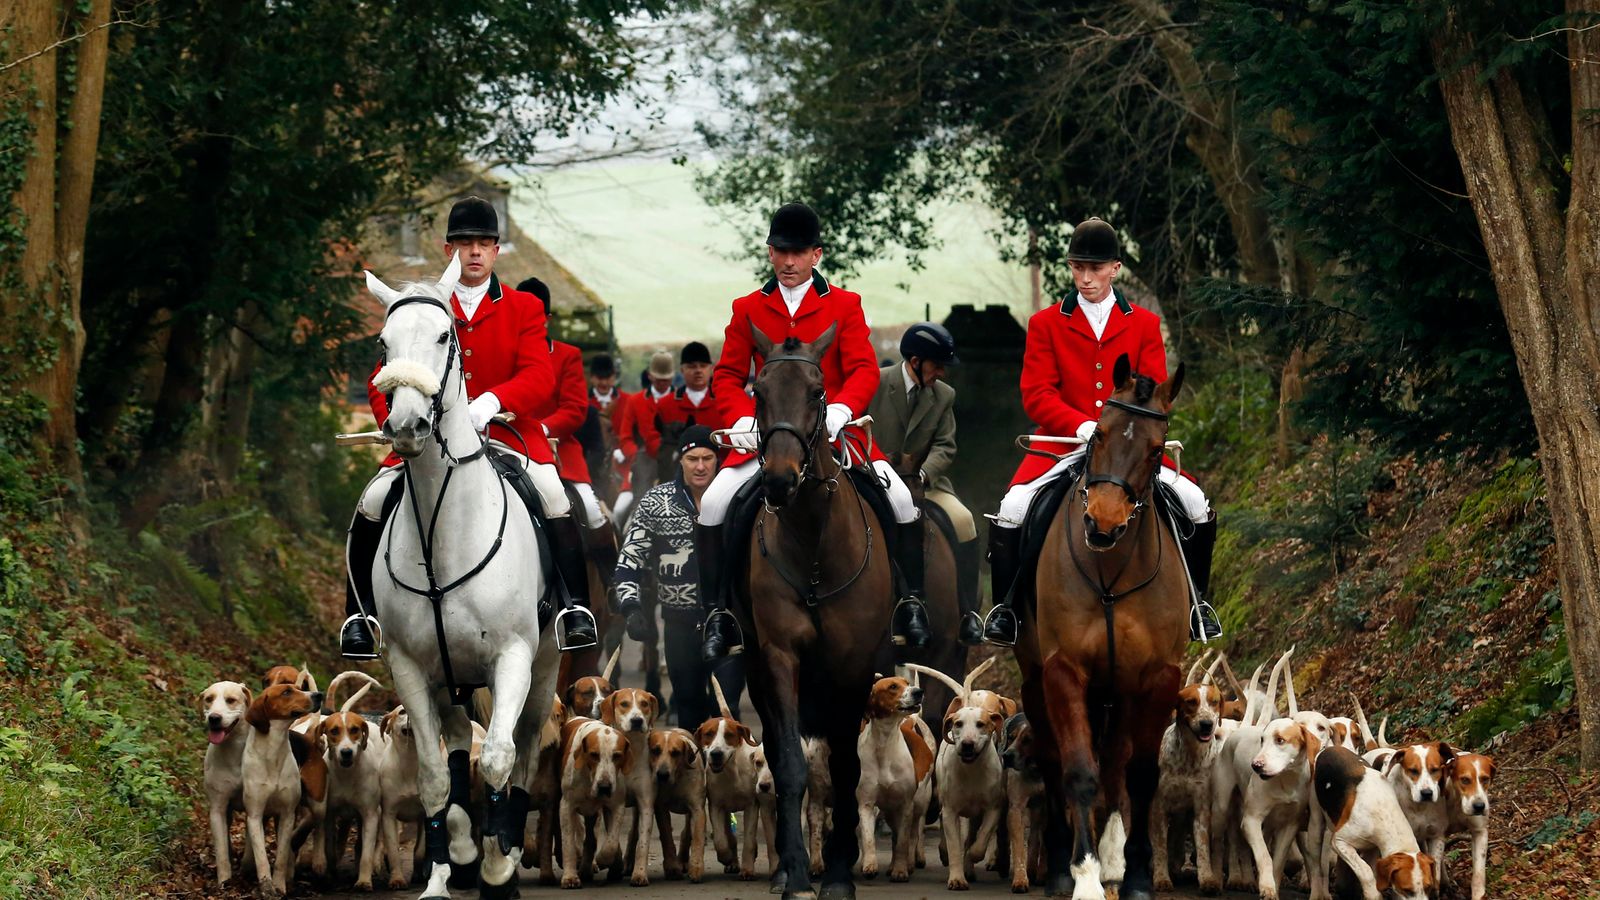 Calls for crack down on hunting 'loophole' ahead of Boxing Day parades